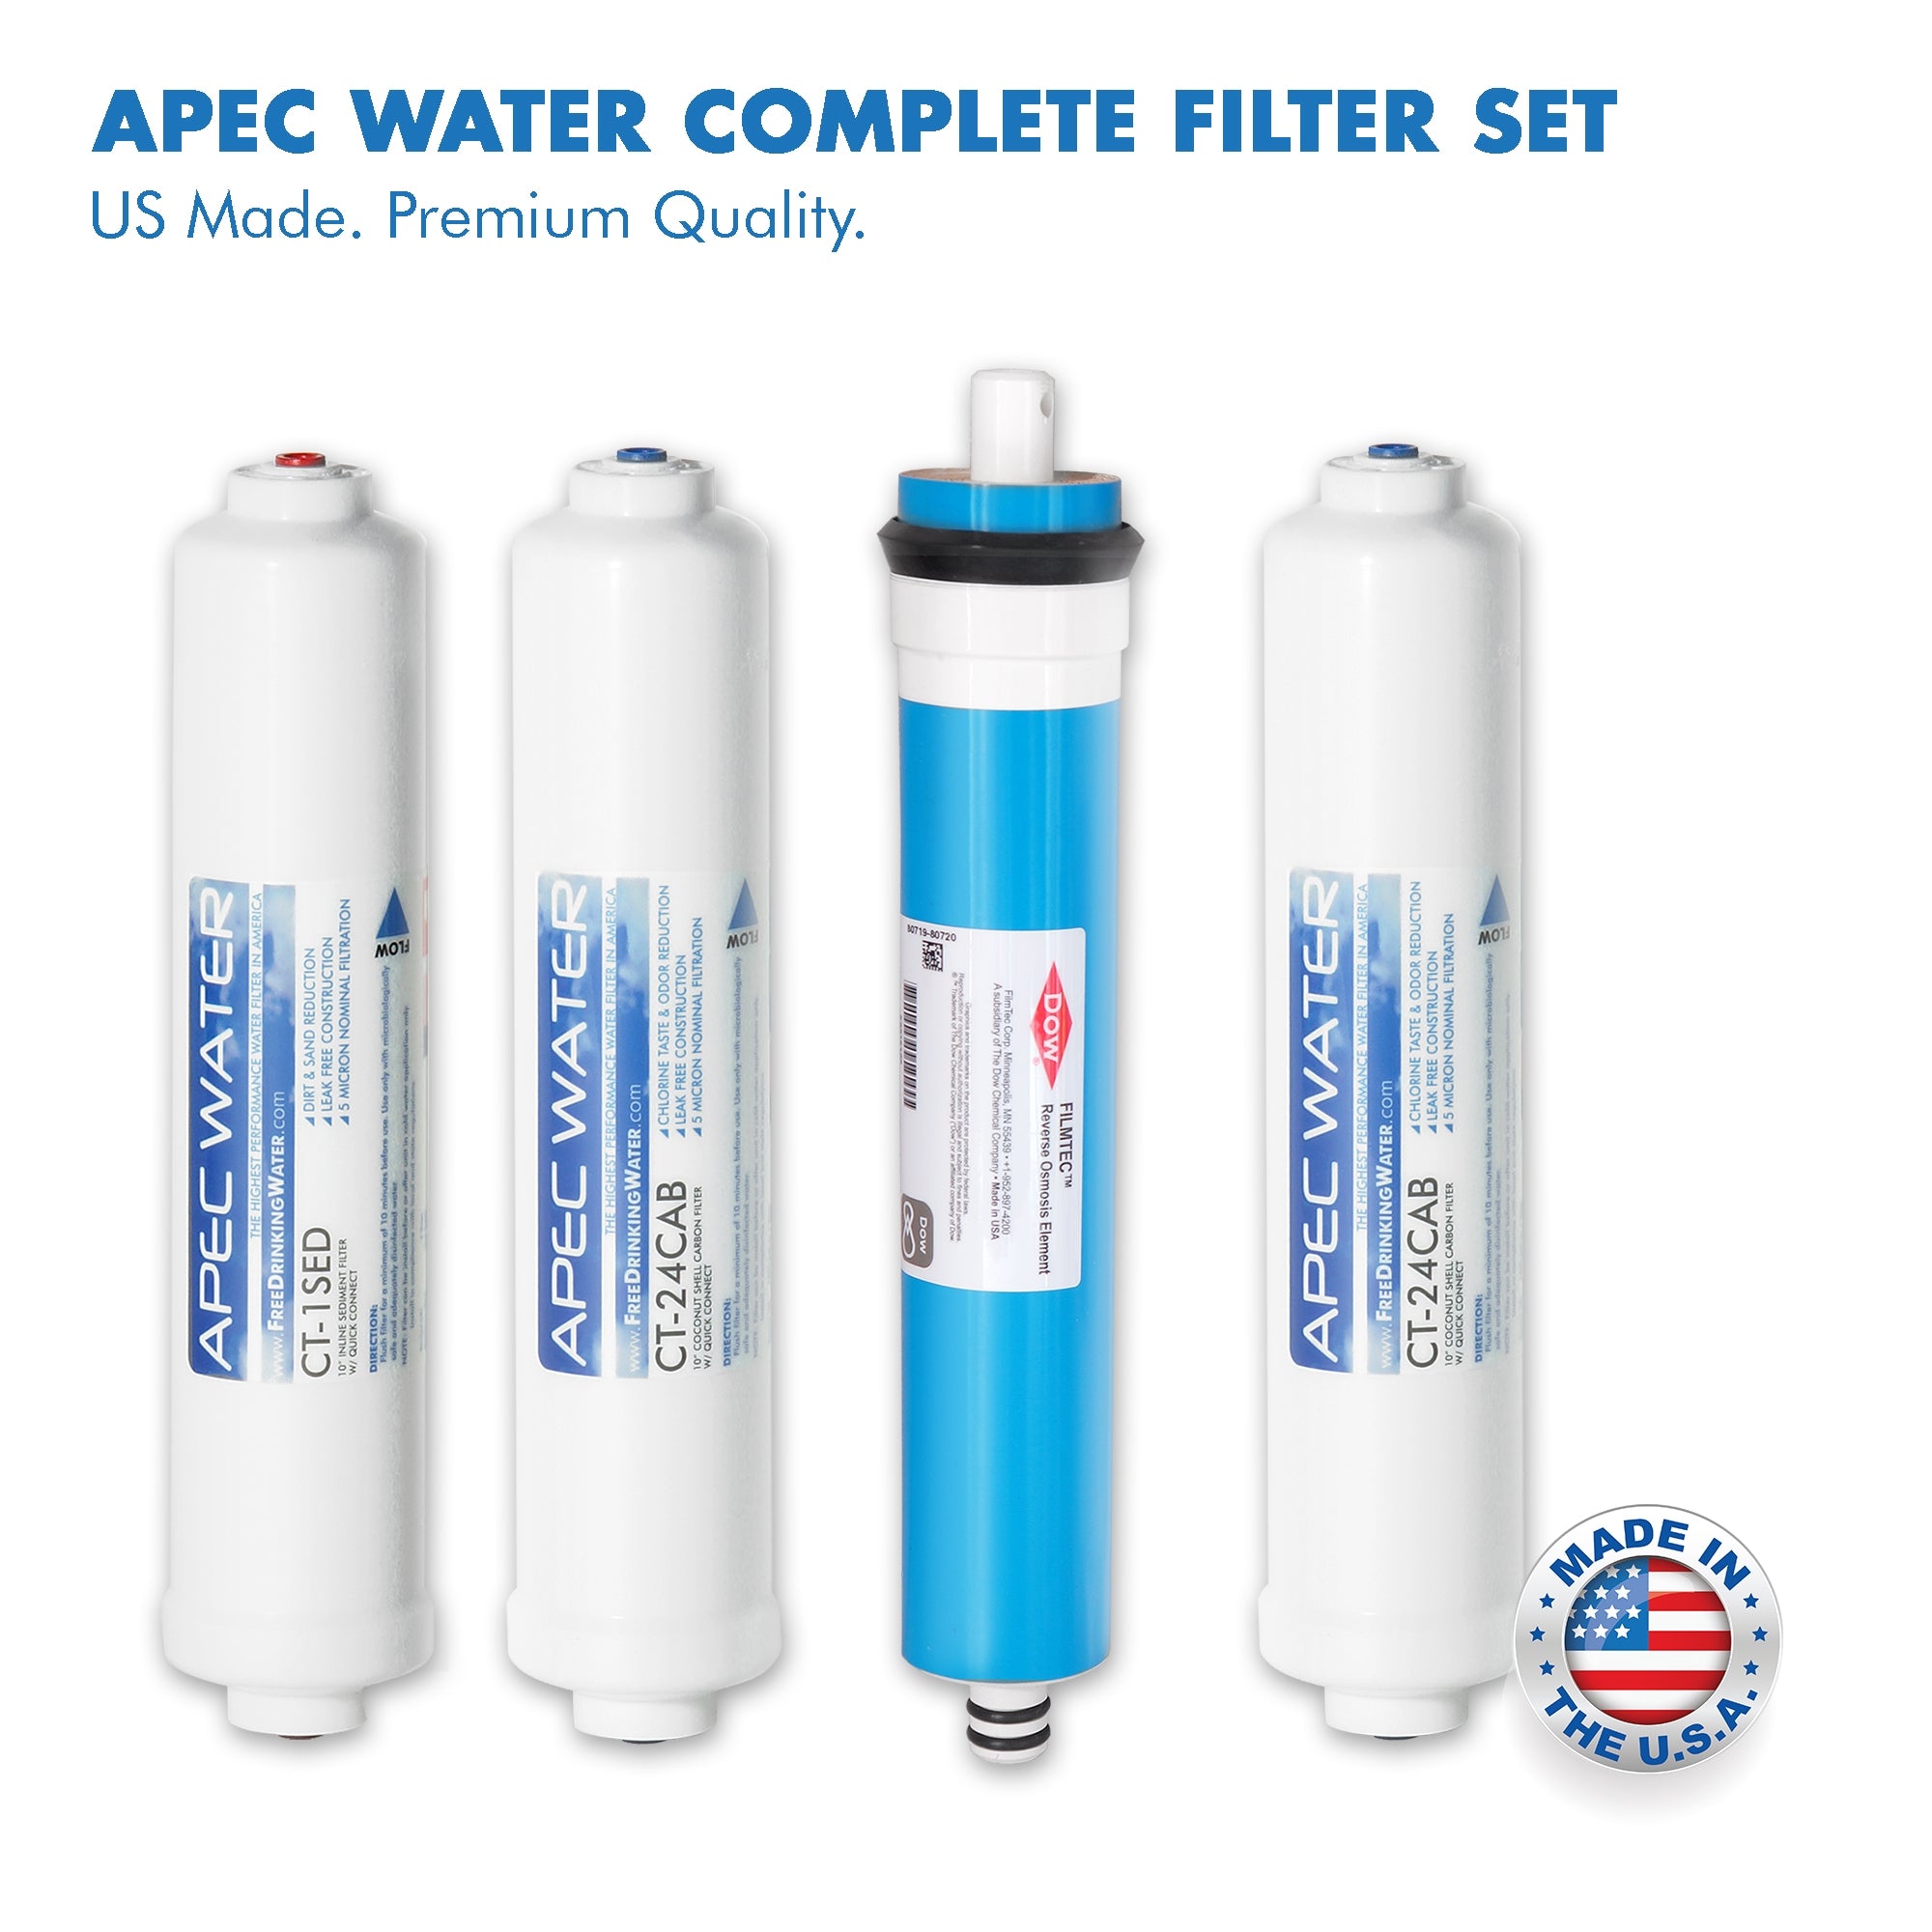 RO-CTOP-C – Portable 90 GPD Countertop Reverse Osmosis Water Systems for Drinking Water, With Case